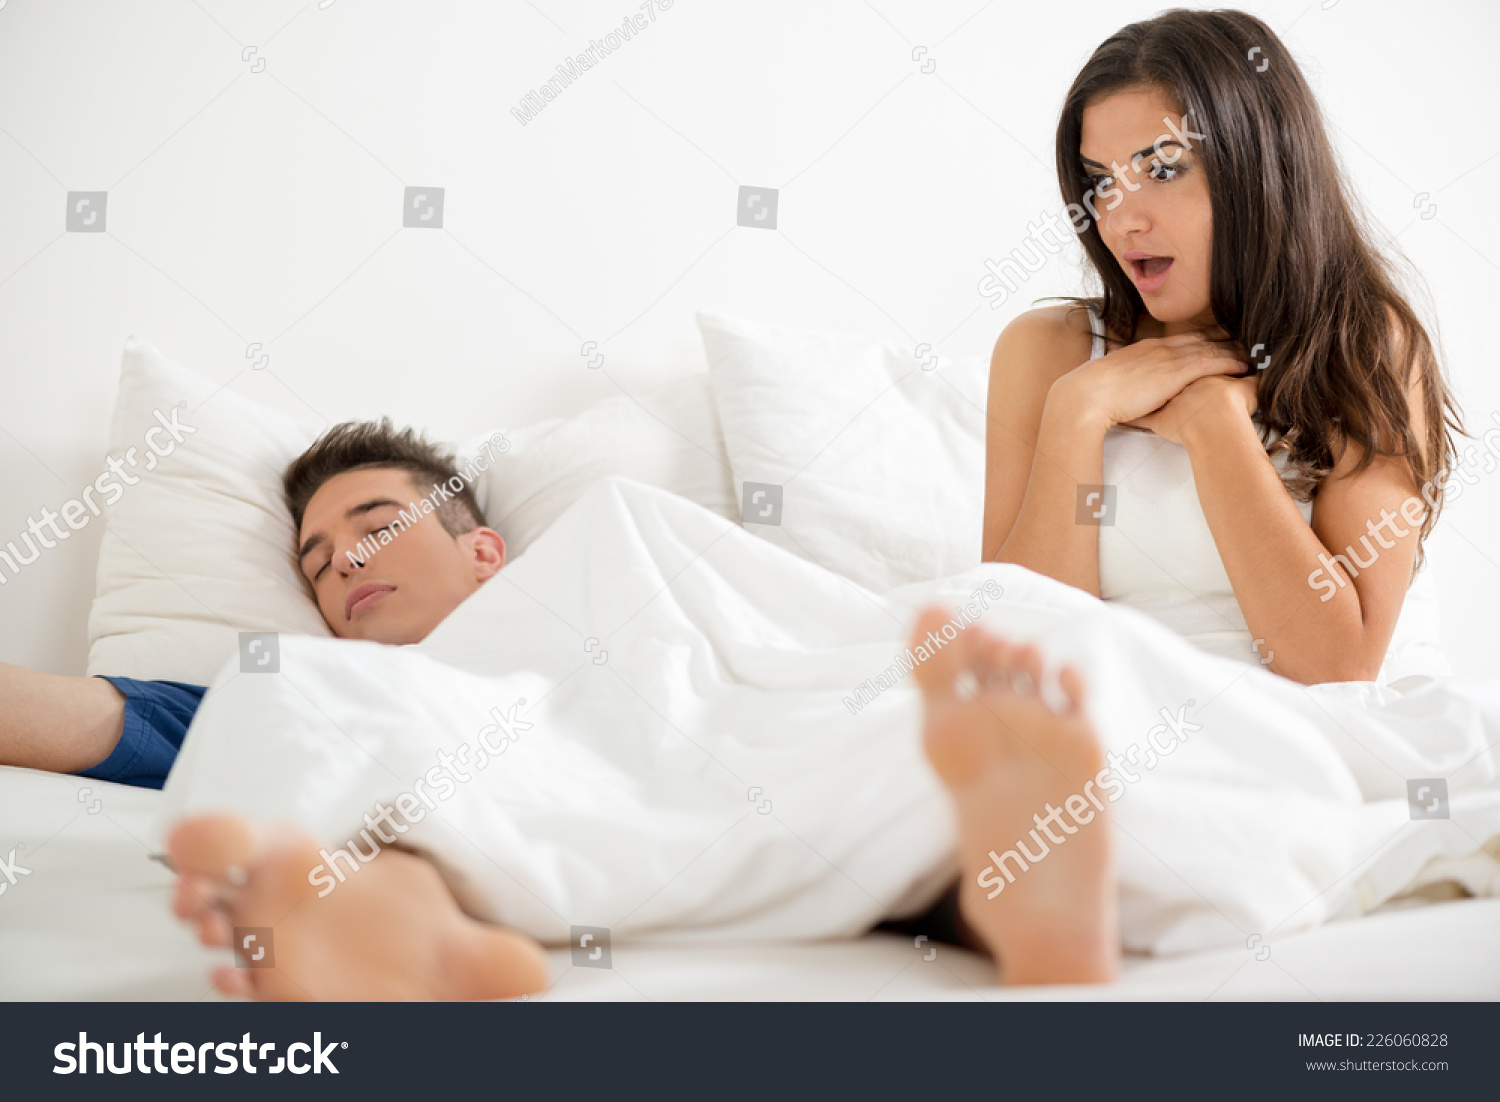 Young Attractive Girl After Waking Up In Bed Looking With Surprise